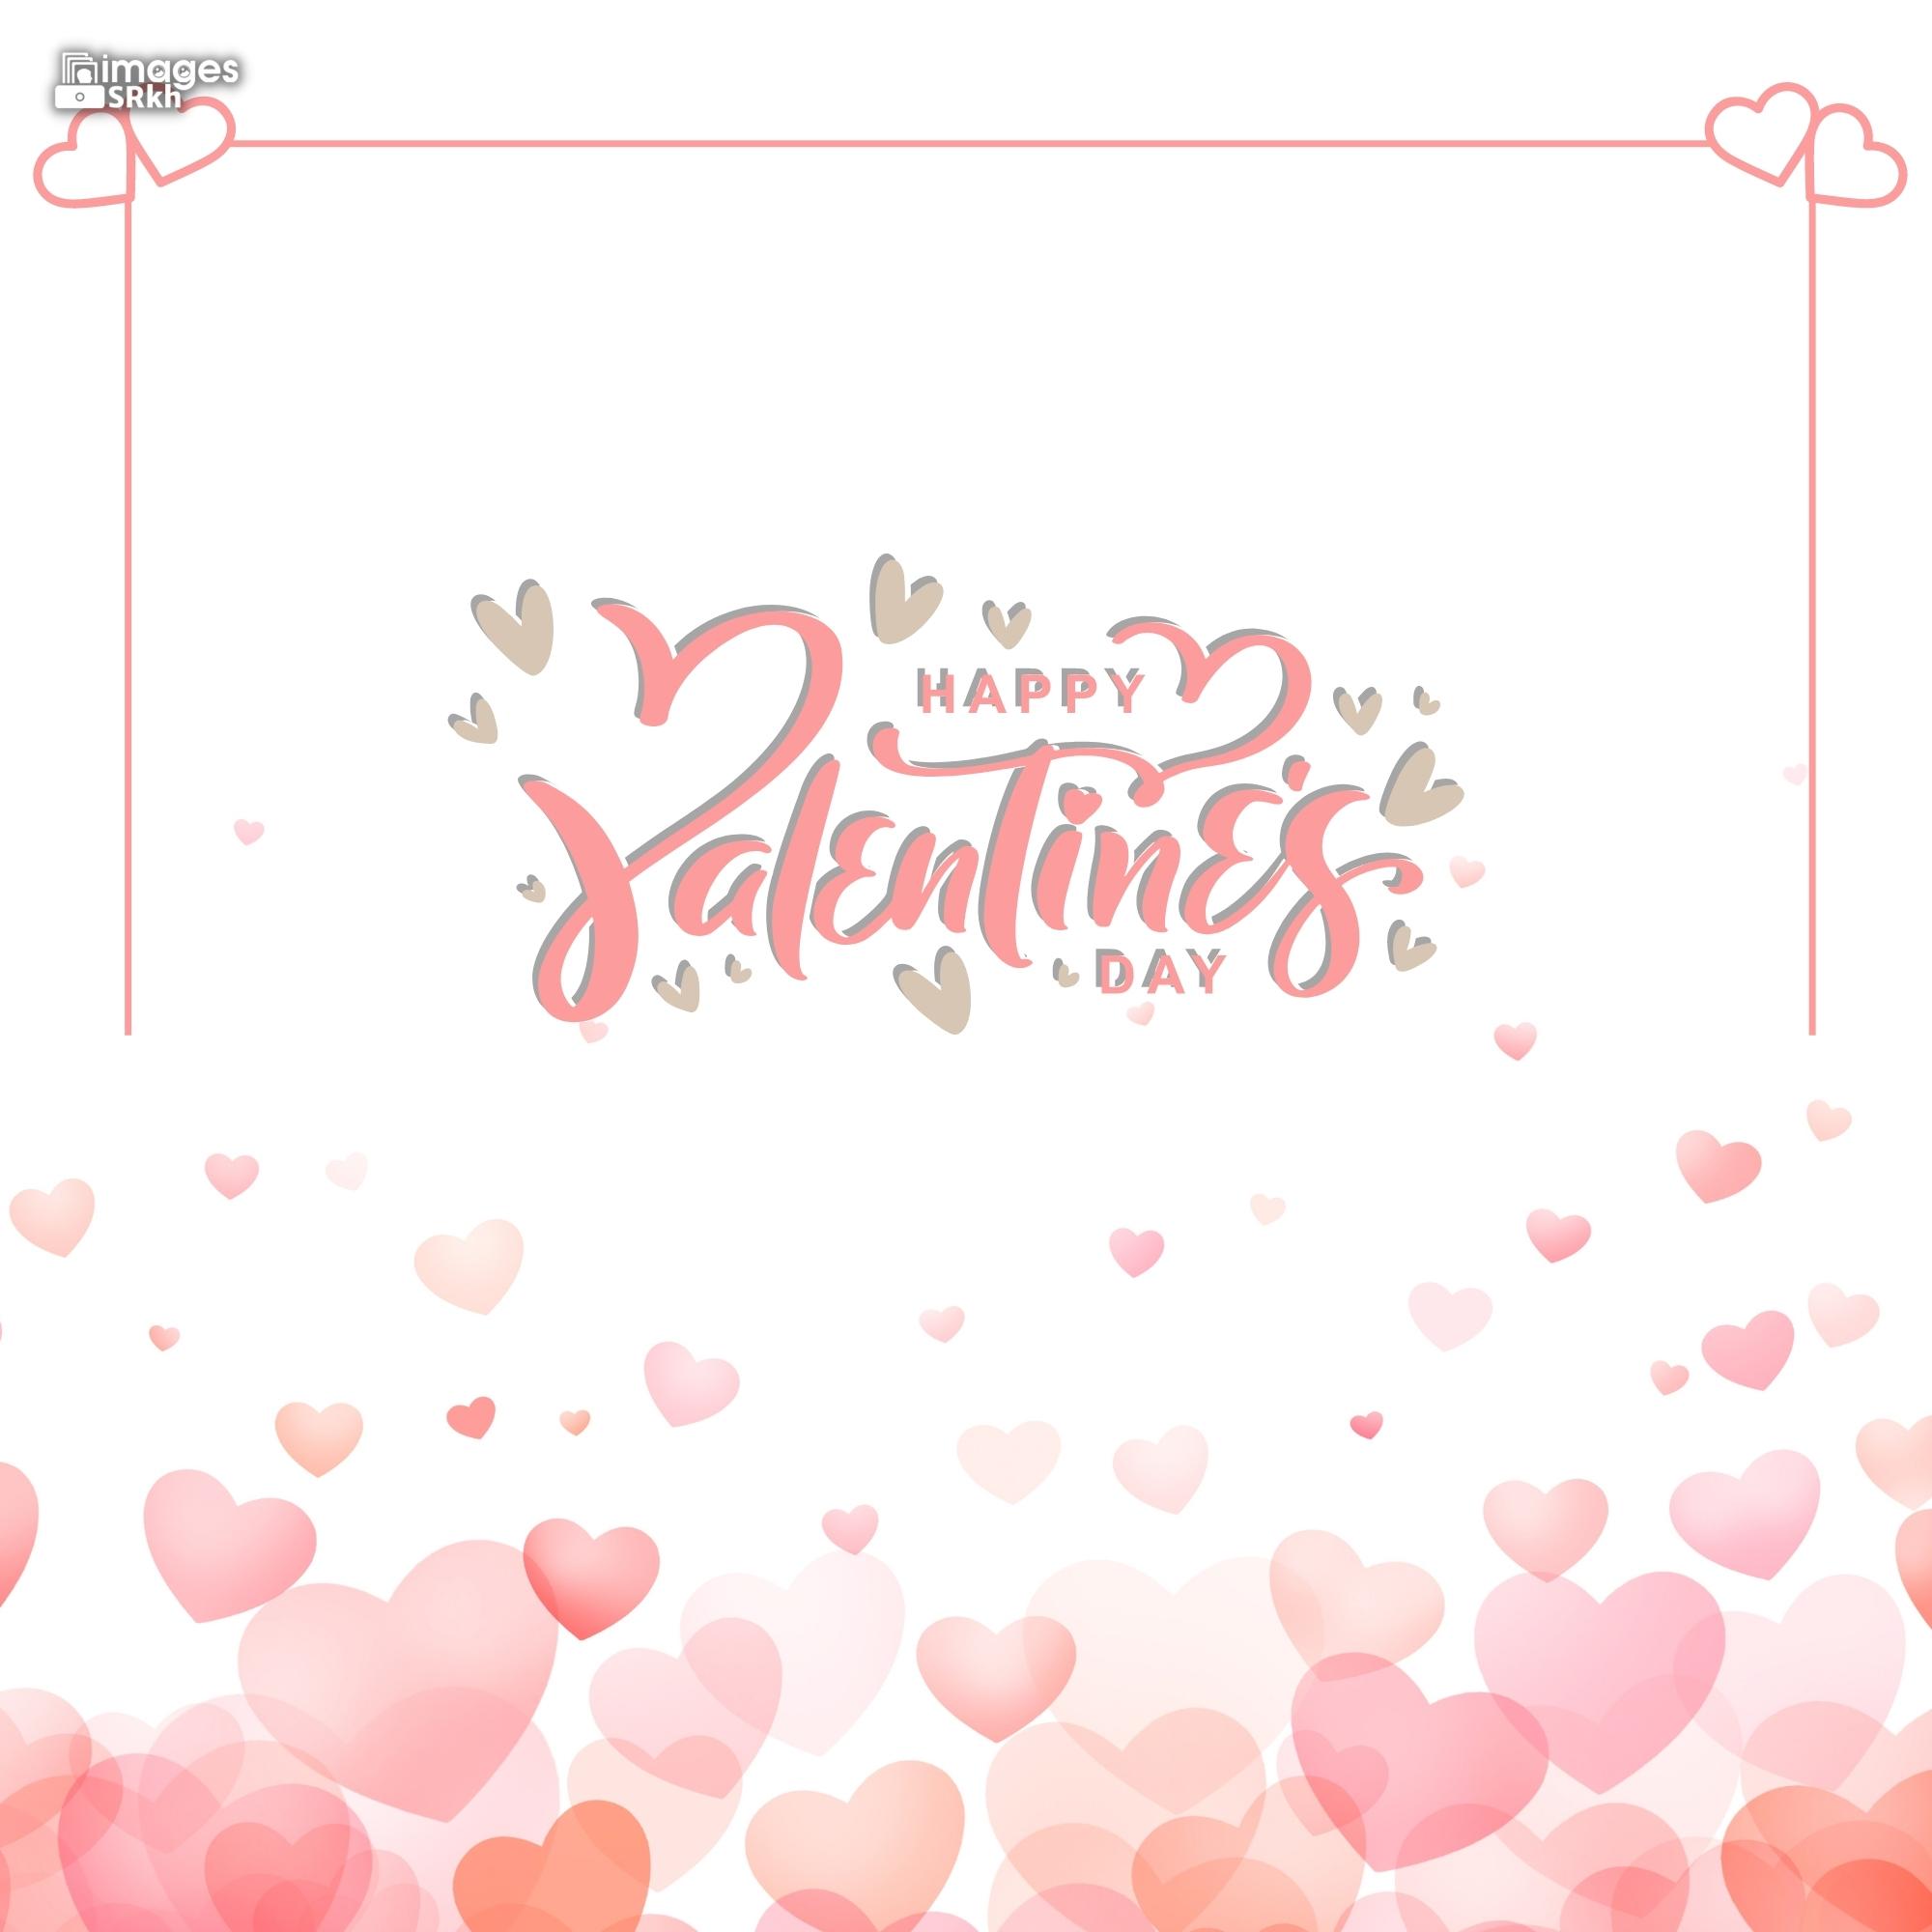 Happy Valentines Day | 440 | PREMIUM IMAGES | Wishes for Love